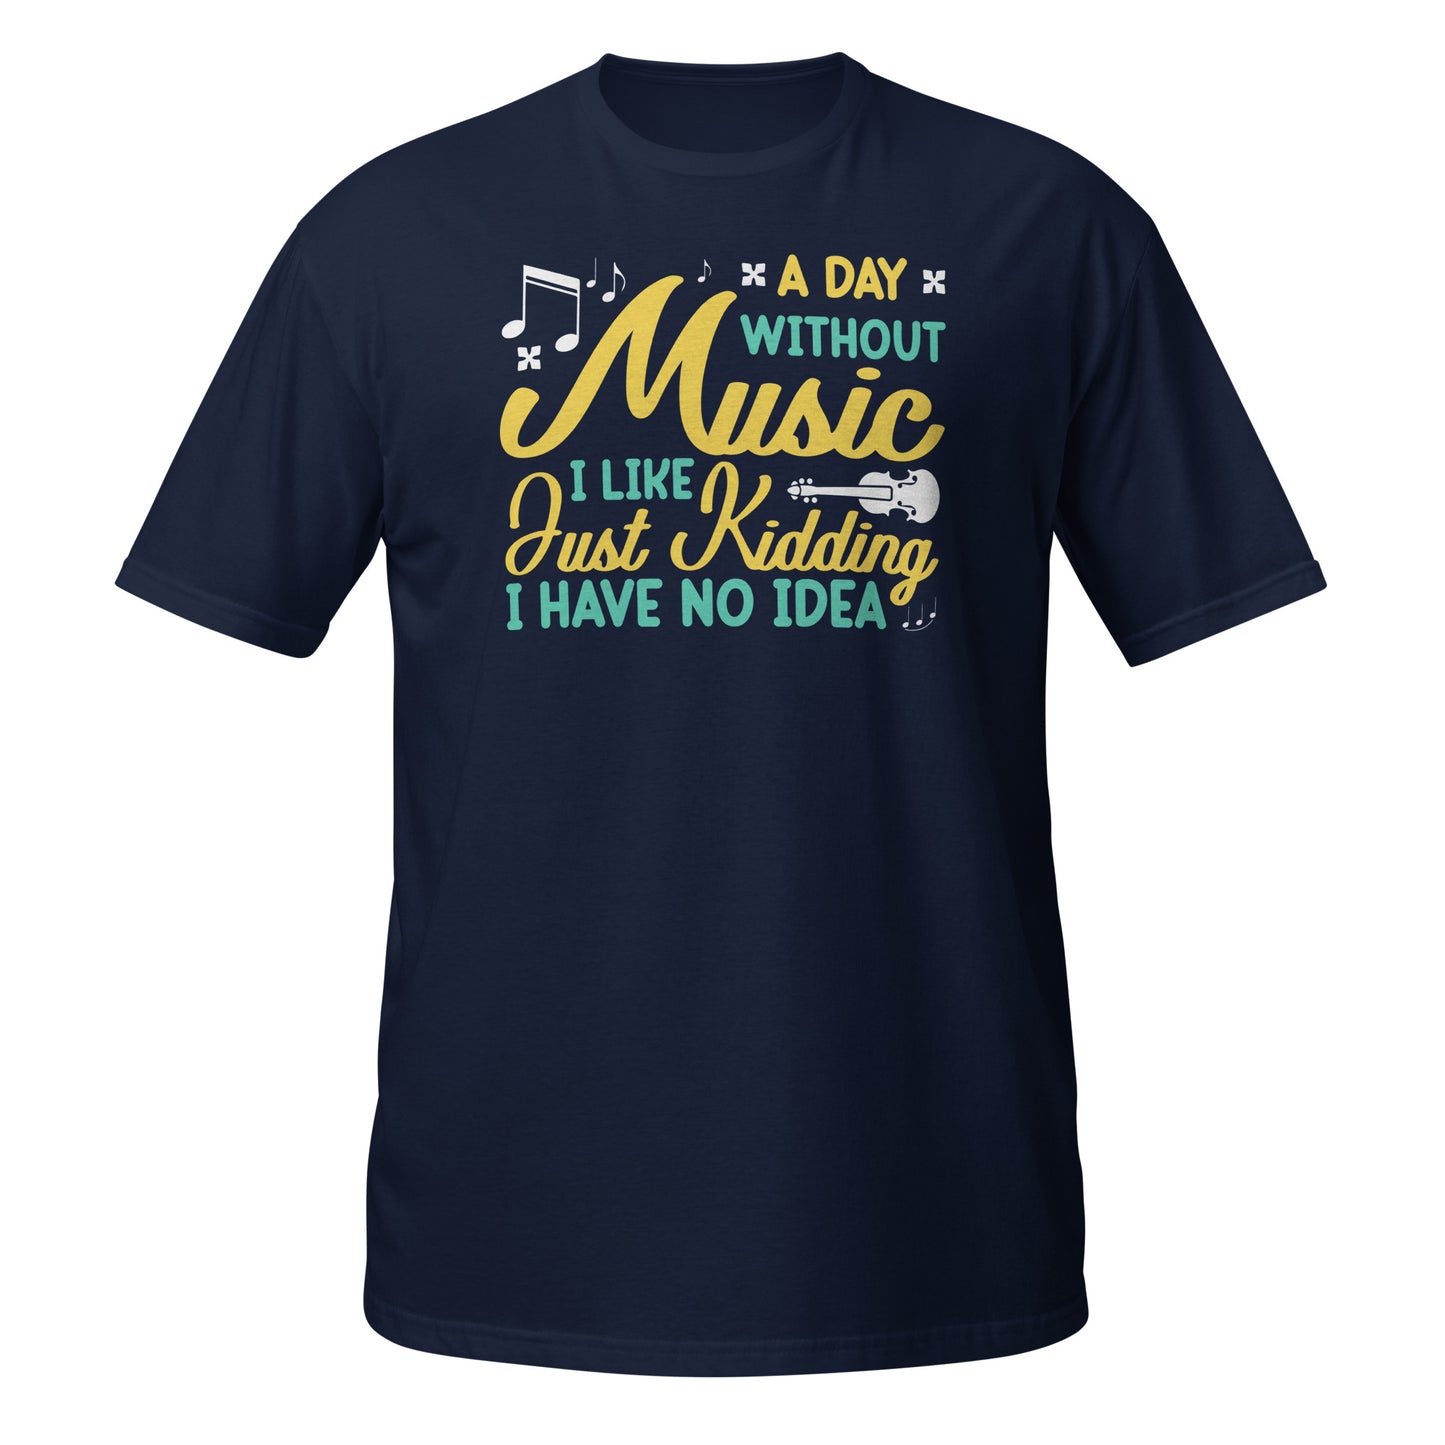 A Day Without Music, I Like, Just Kidding, I Have No Idea Shirt